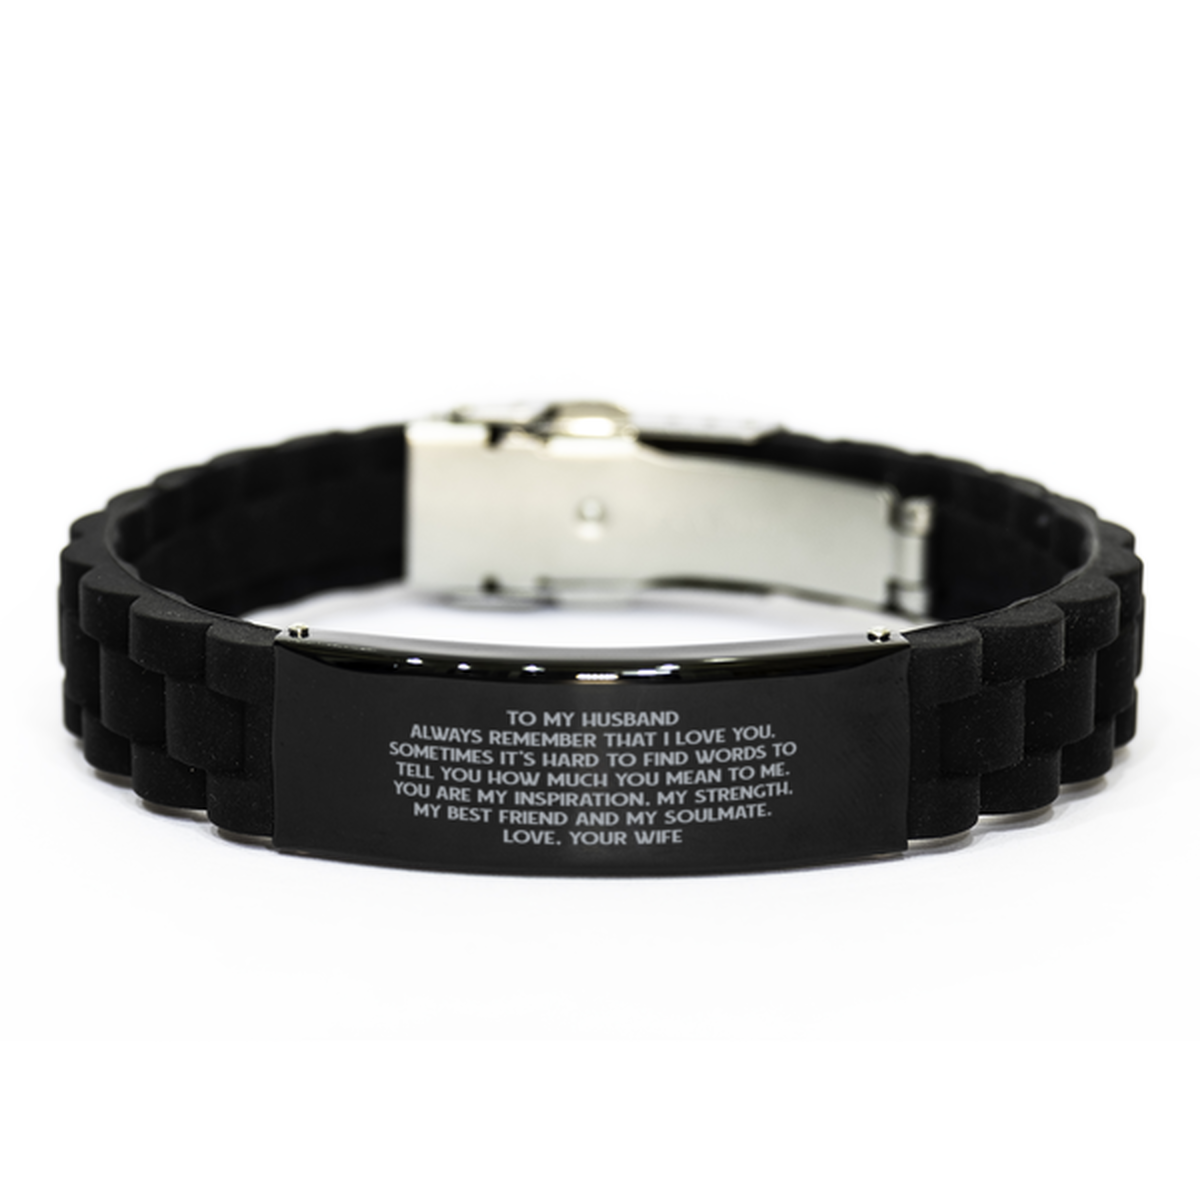 To My Husband Black Bracelet, Always Remember That I Love You, Anniversary Gifts For Husband From Wife, Birthday Gifts For Men